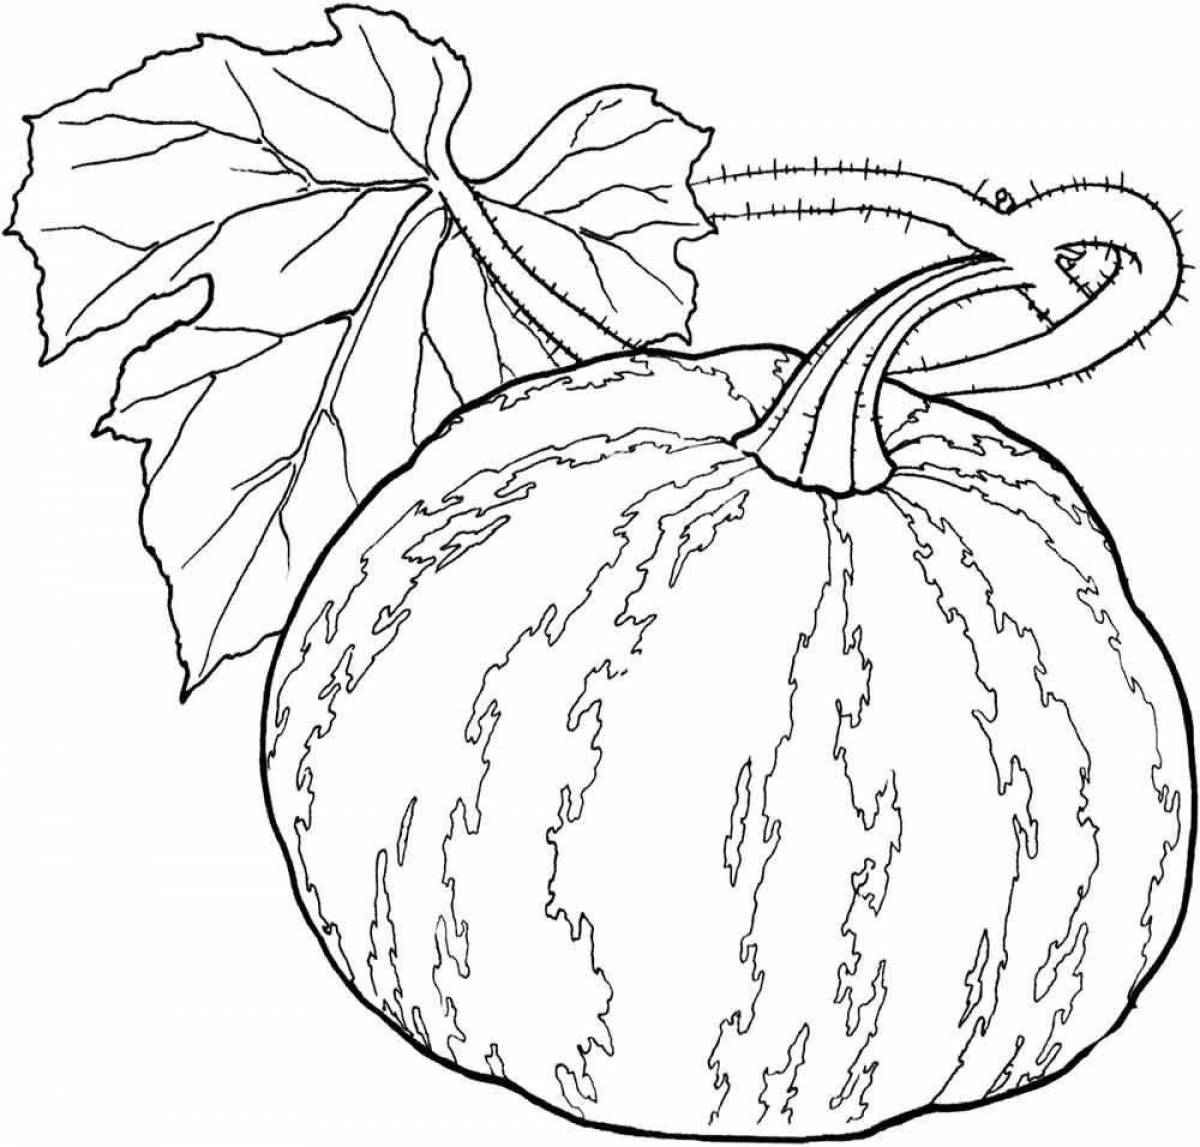 Amazing fruits and vegetables coloring pages for kids